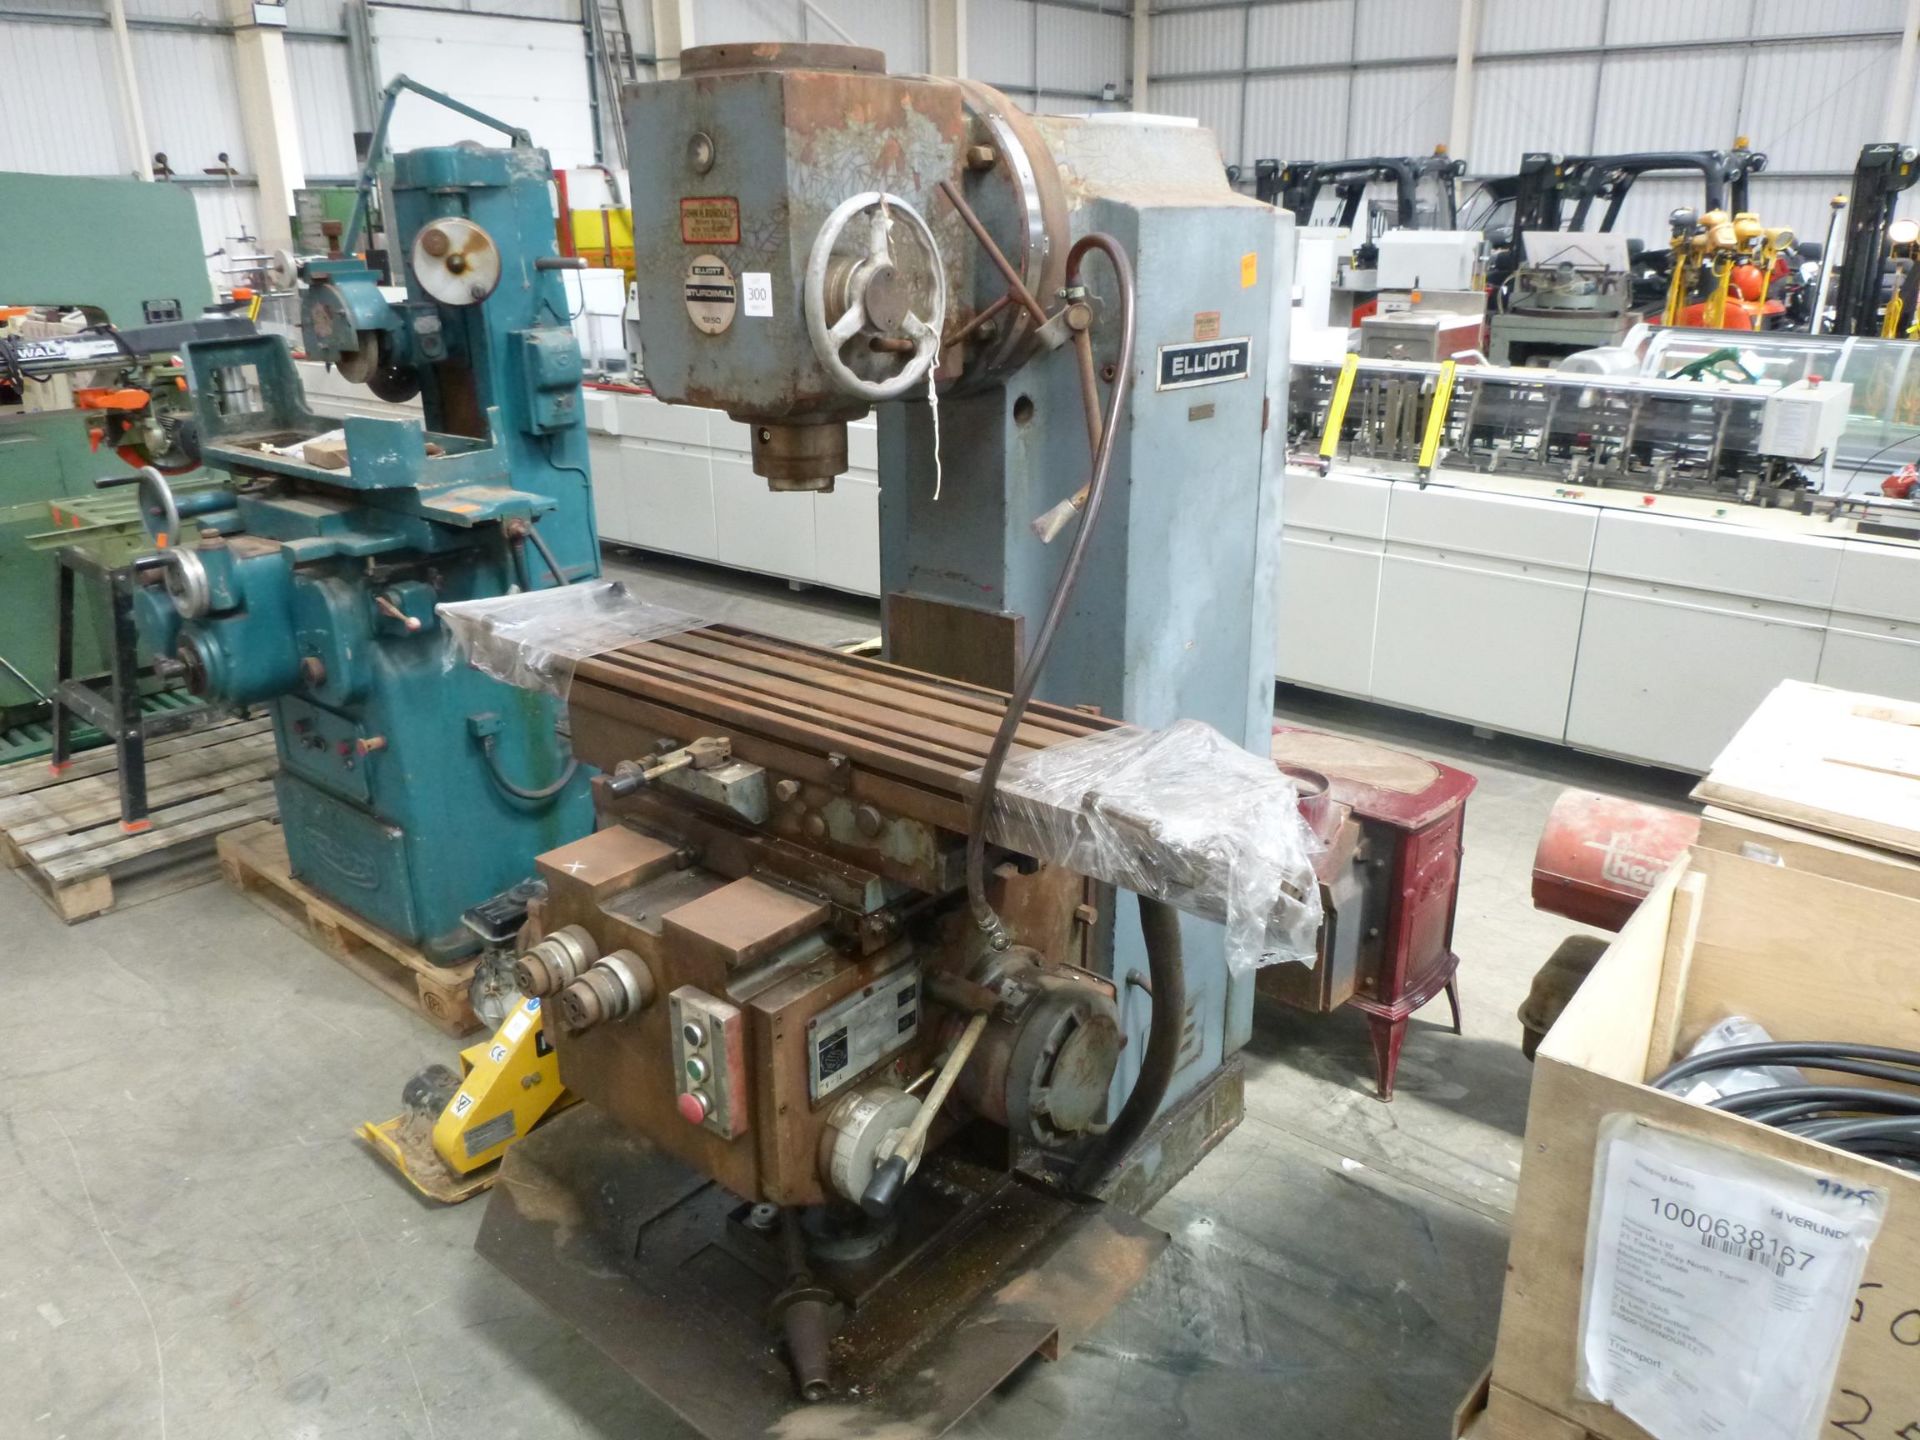 * An Elliot Sturdimill 1250 Milling Machine, S/N HQ13272 D4019202, 3PH. Please note there is a £20